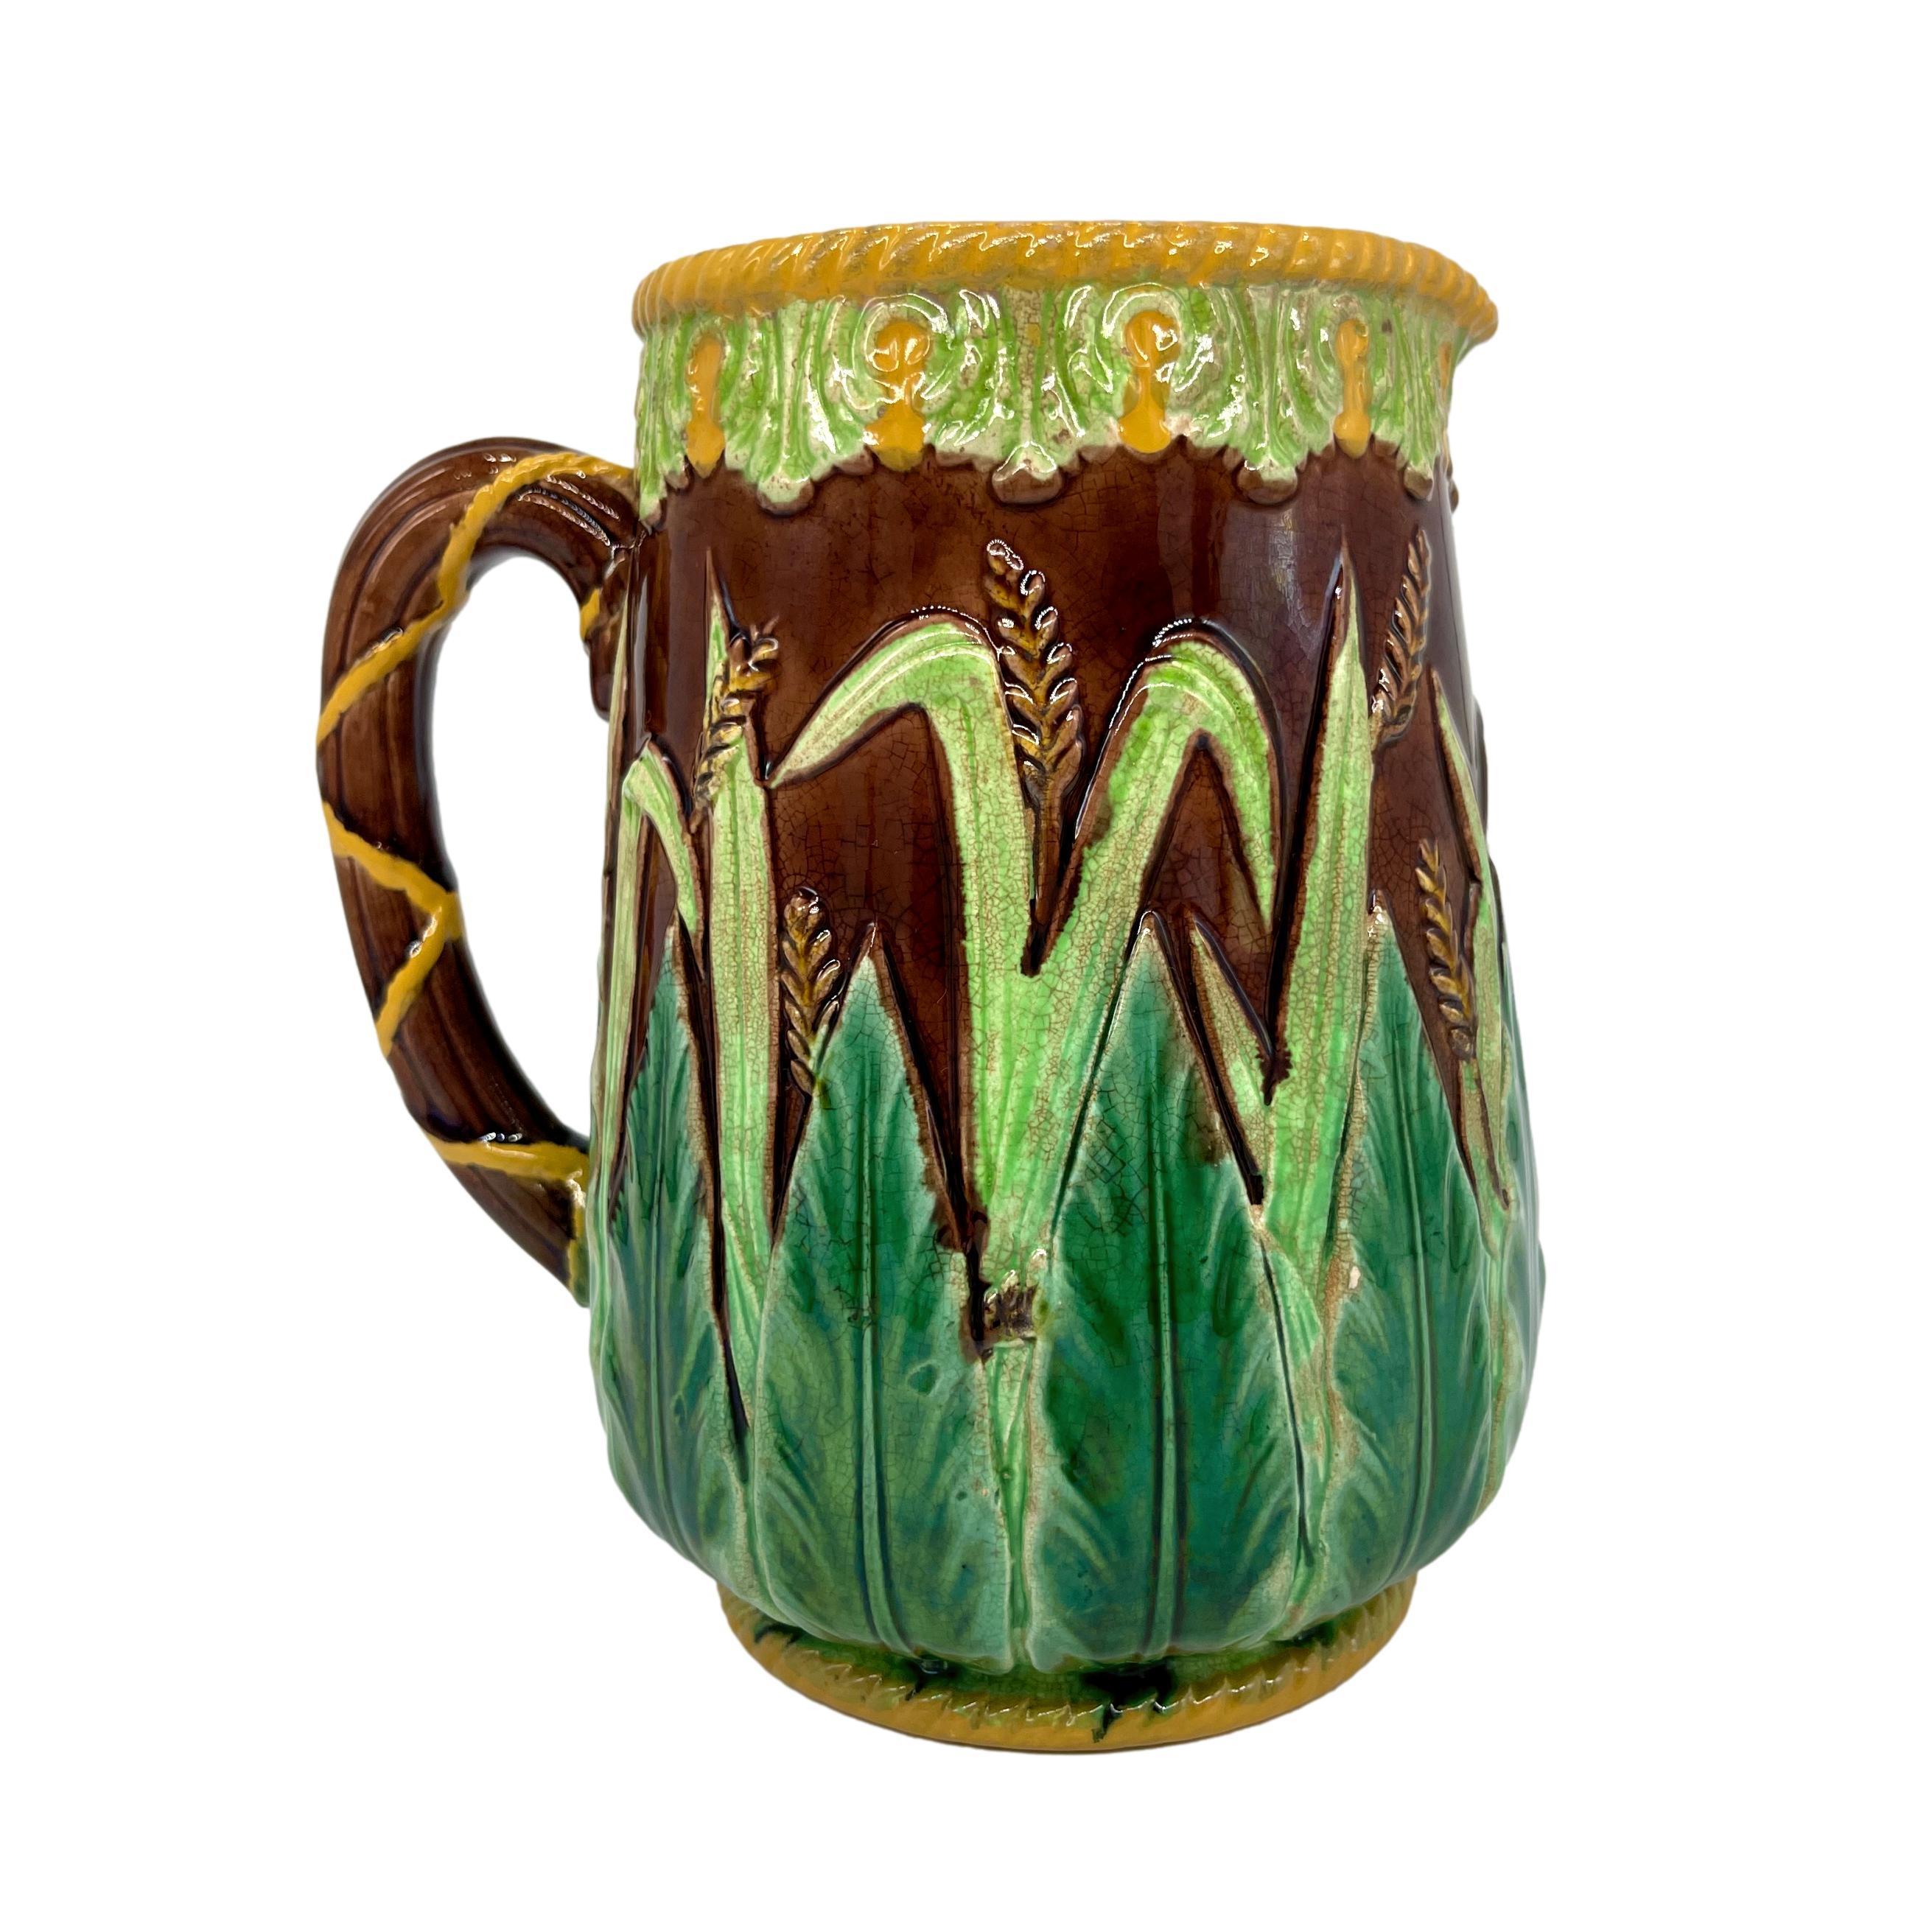 George Jones Majolica Wheat Pitcher with Green Acanthus Leaves, Ca. 1875 In Good Condition For Sale In Banner Elk, NC